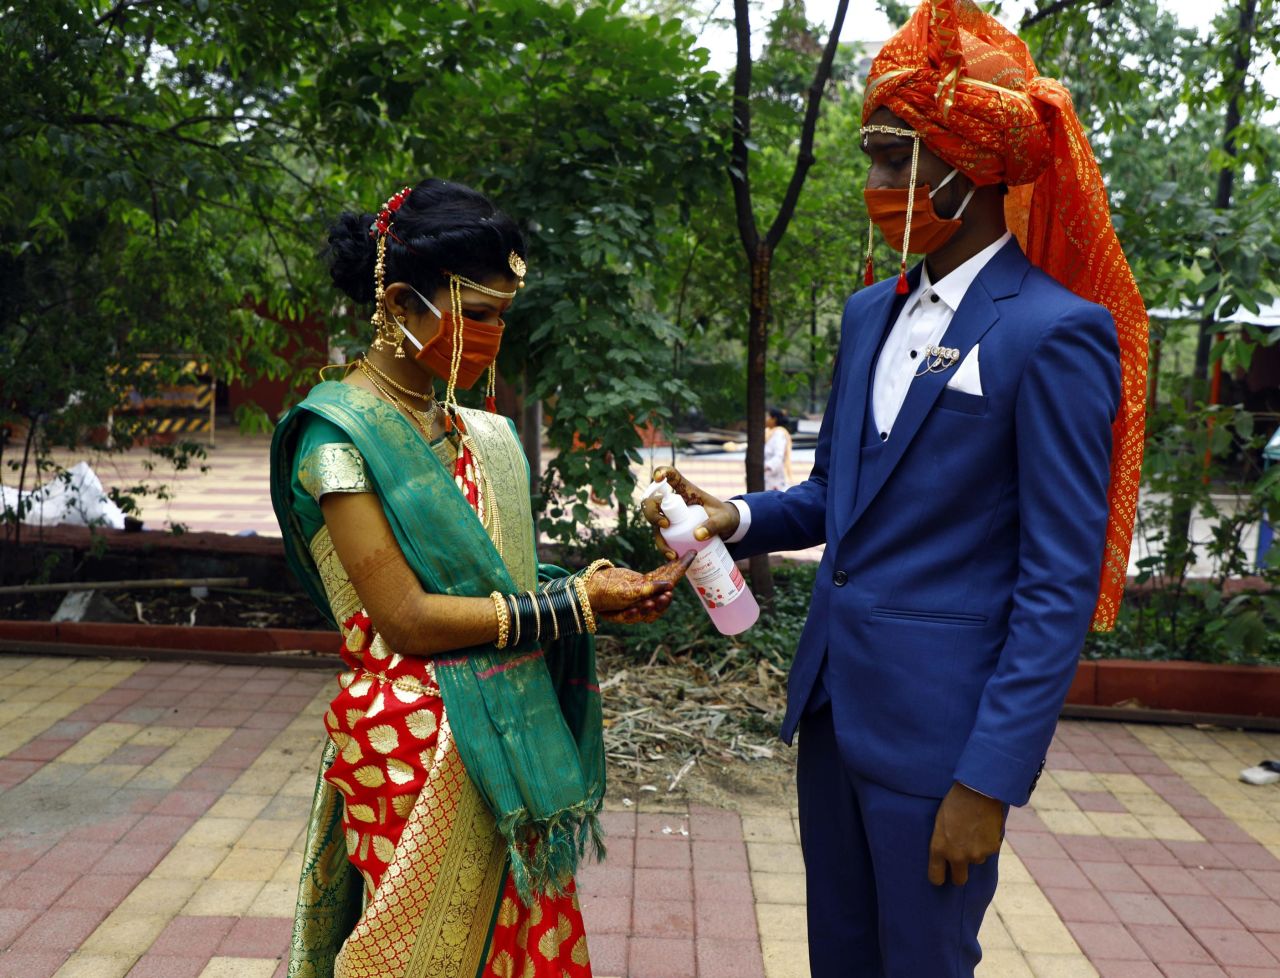 A couple use hand sanitizer following their wedding ceremony in Pune, India, in May.